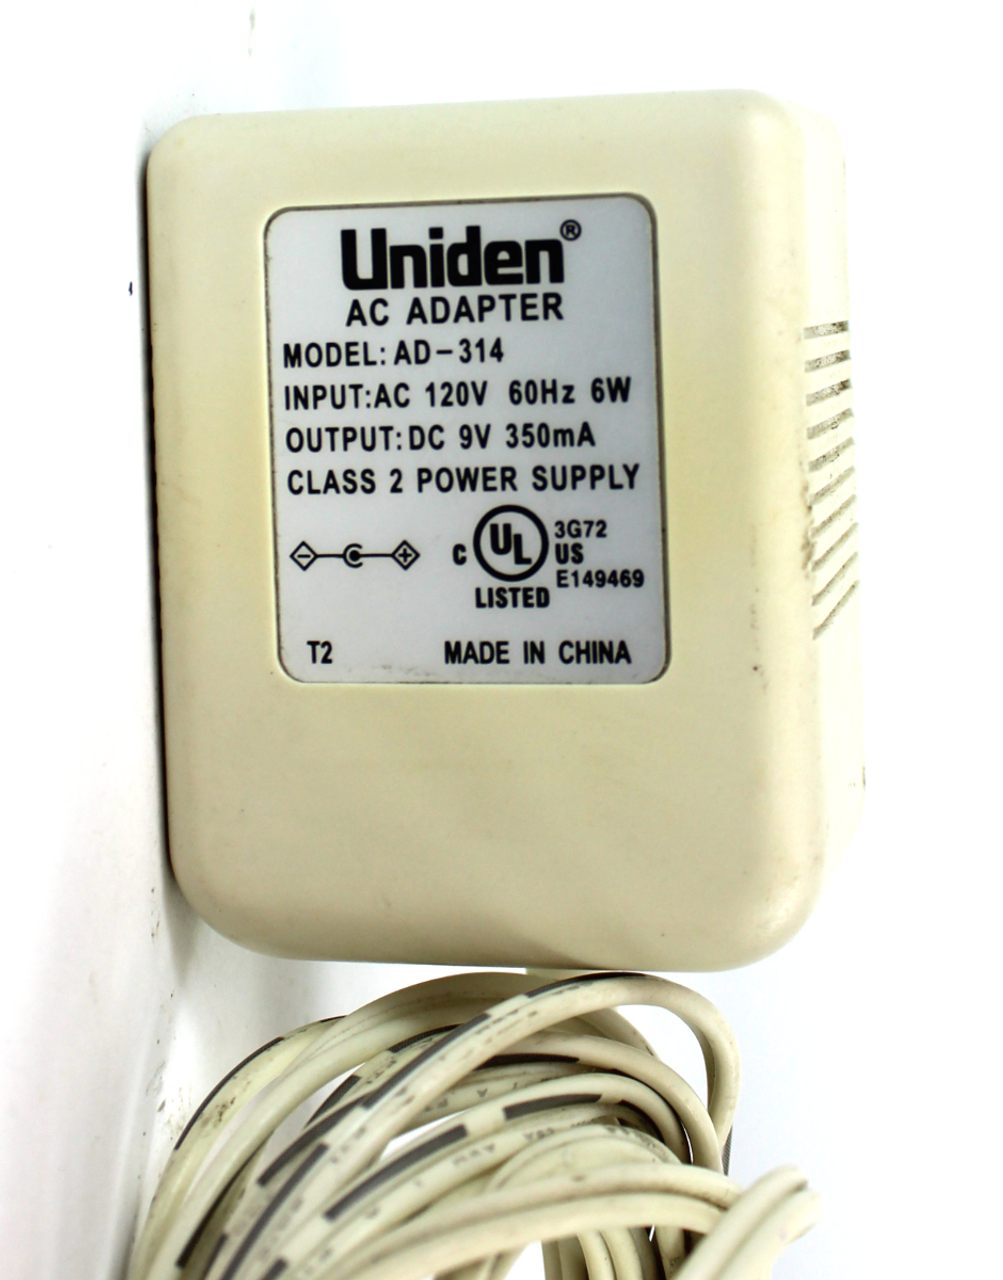 Uniden AD-314 AC Adapter Power Supply